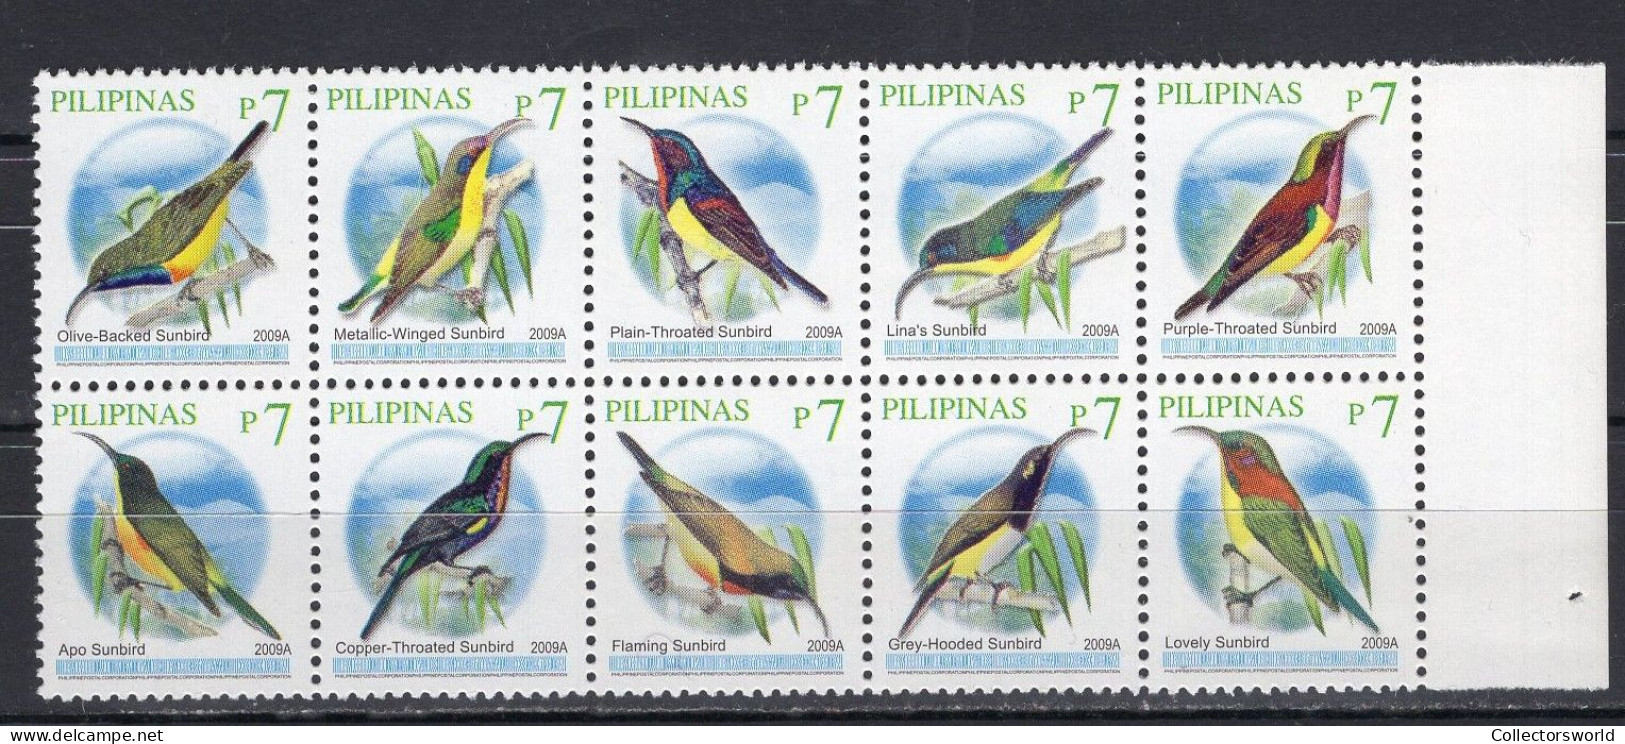 Philippines Serie 10v 2009 Year 2009A On Stamps - Birds Sunbirds MNH - Filippine